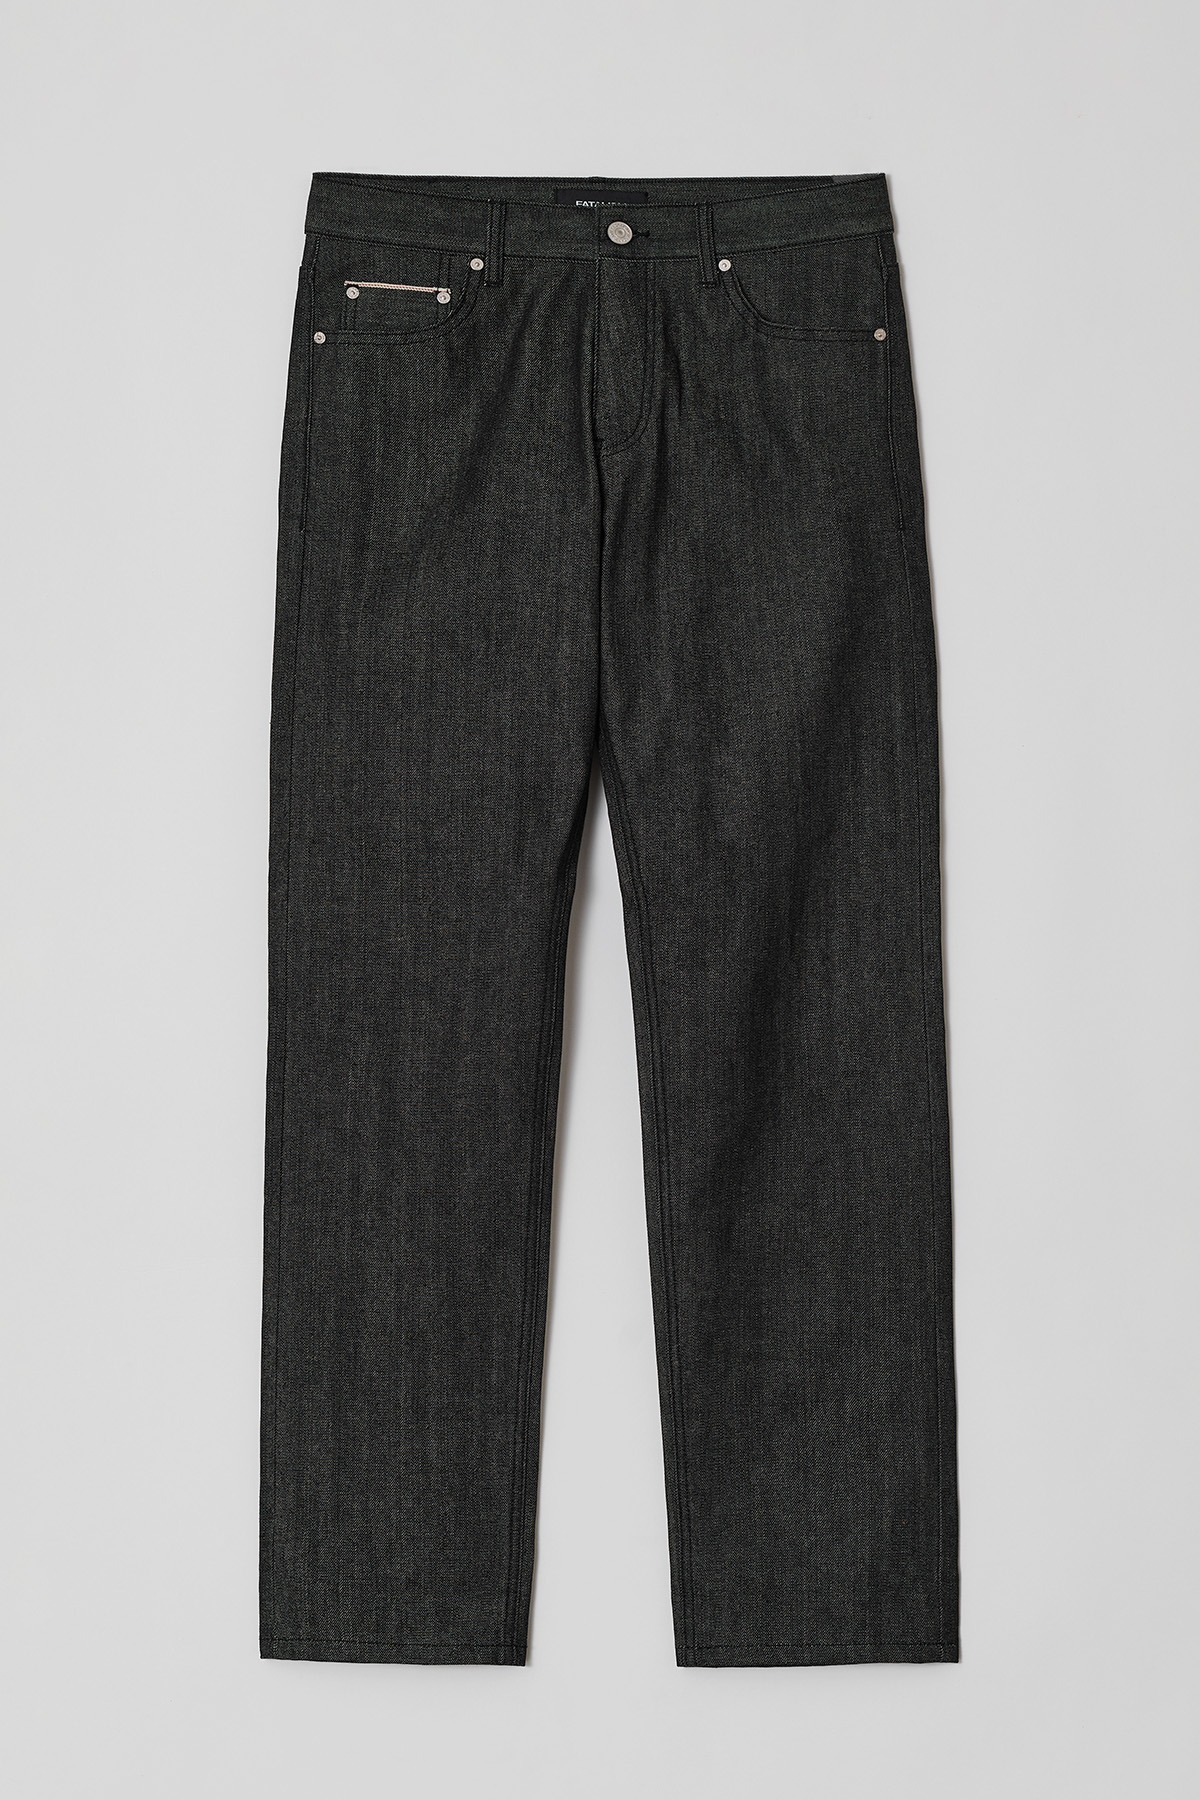 Moderation black selvage weave